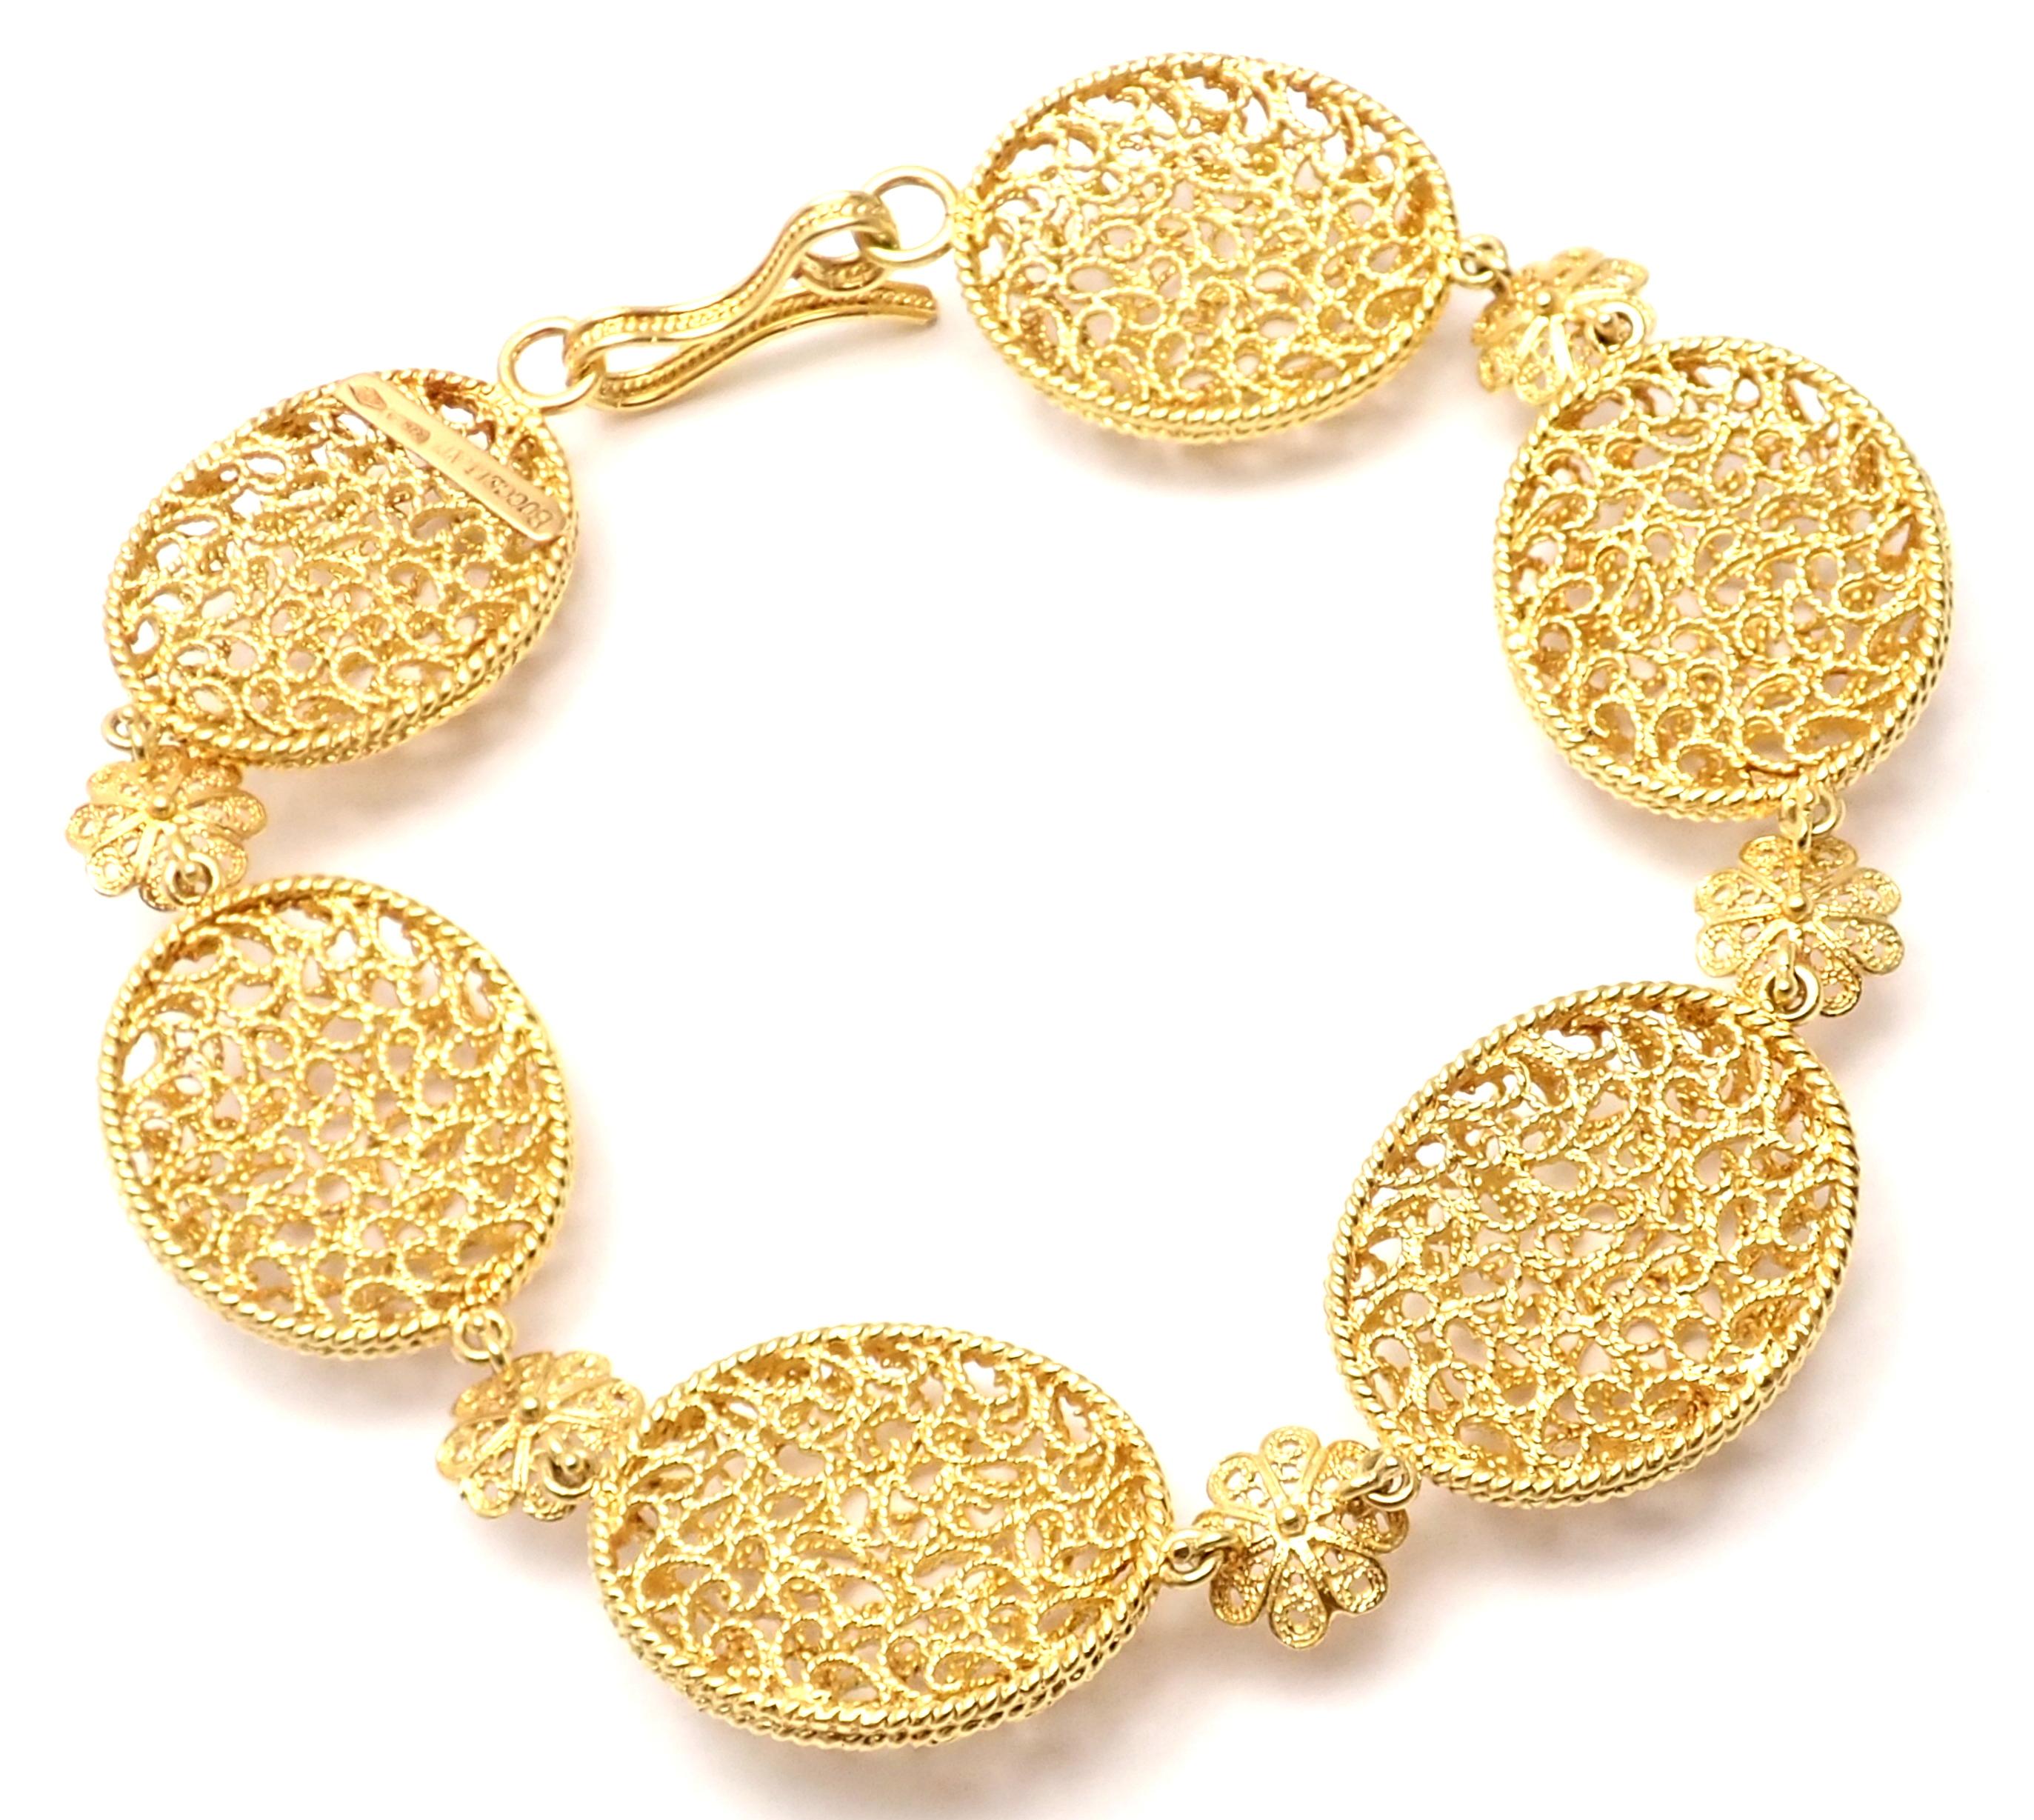 18k Yellow Gold Filidoro Link Bracelet by Buccellati. 
This bracelet comes with Buccellati box and certificate of authenticity.
Details: 
Weight: 23.7 grams
Length: 8